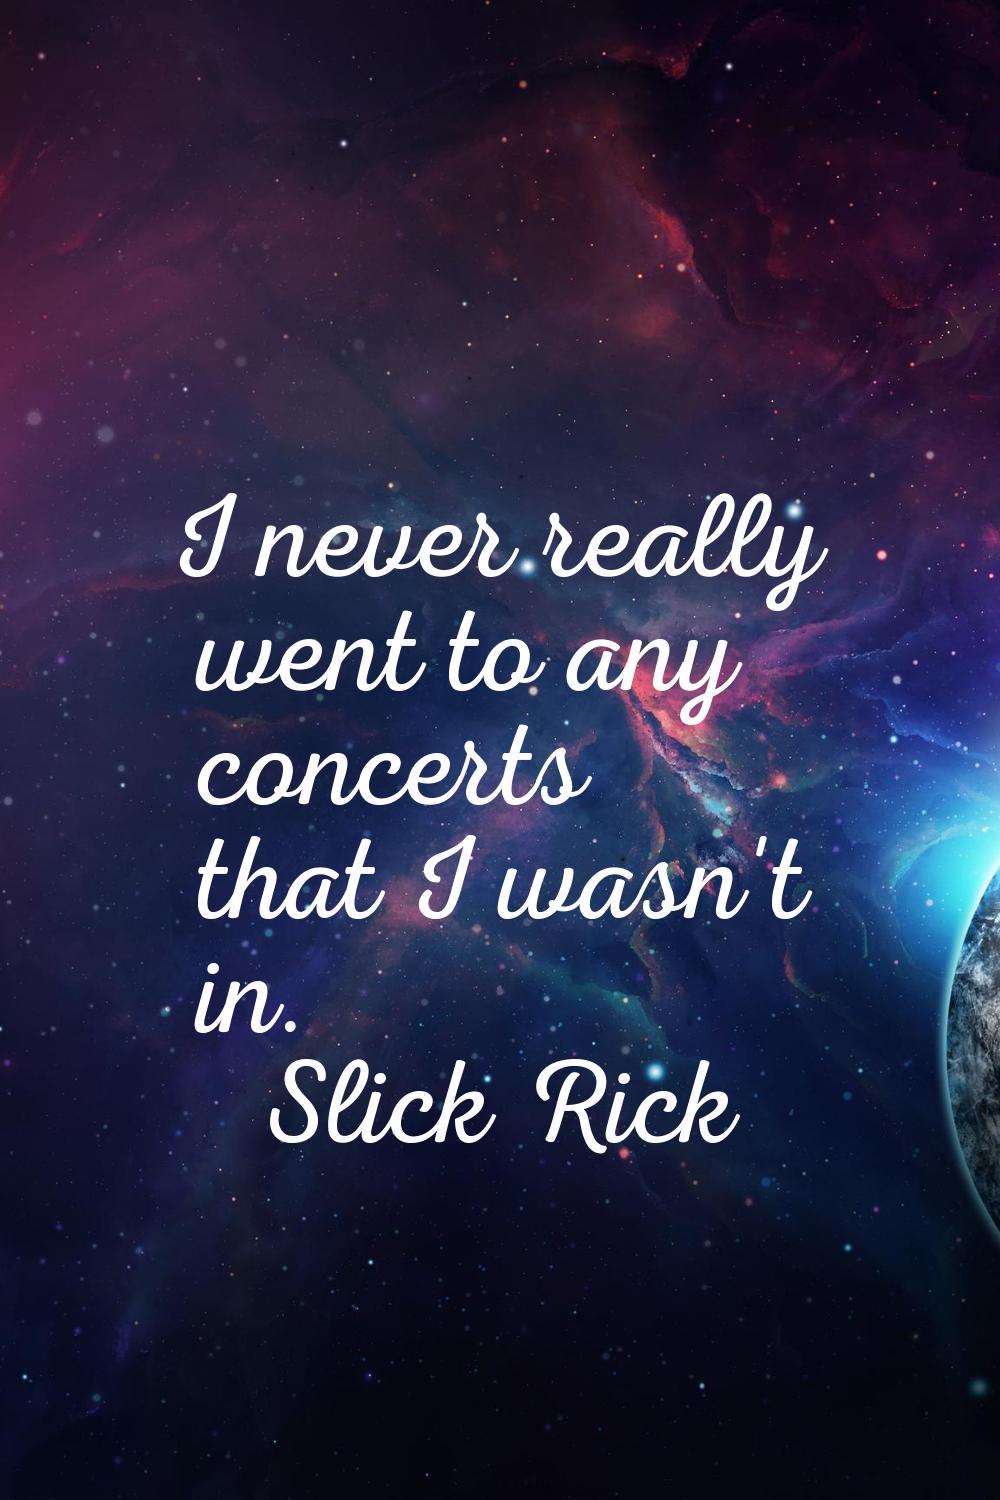 I never really went to any concerts that I wasn't in.